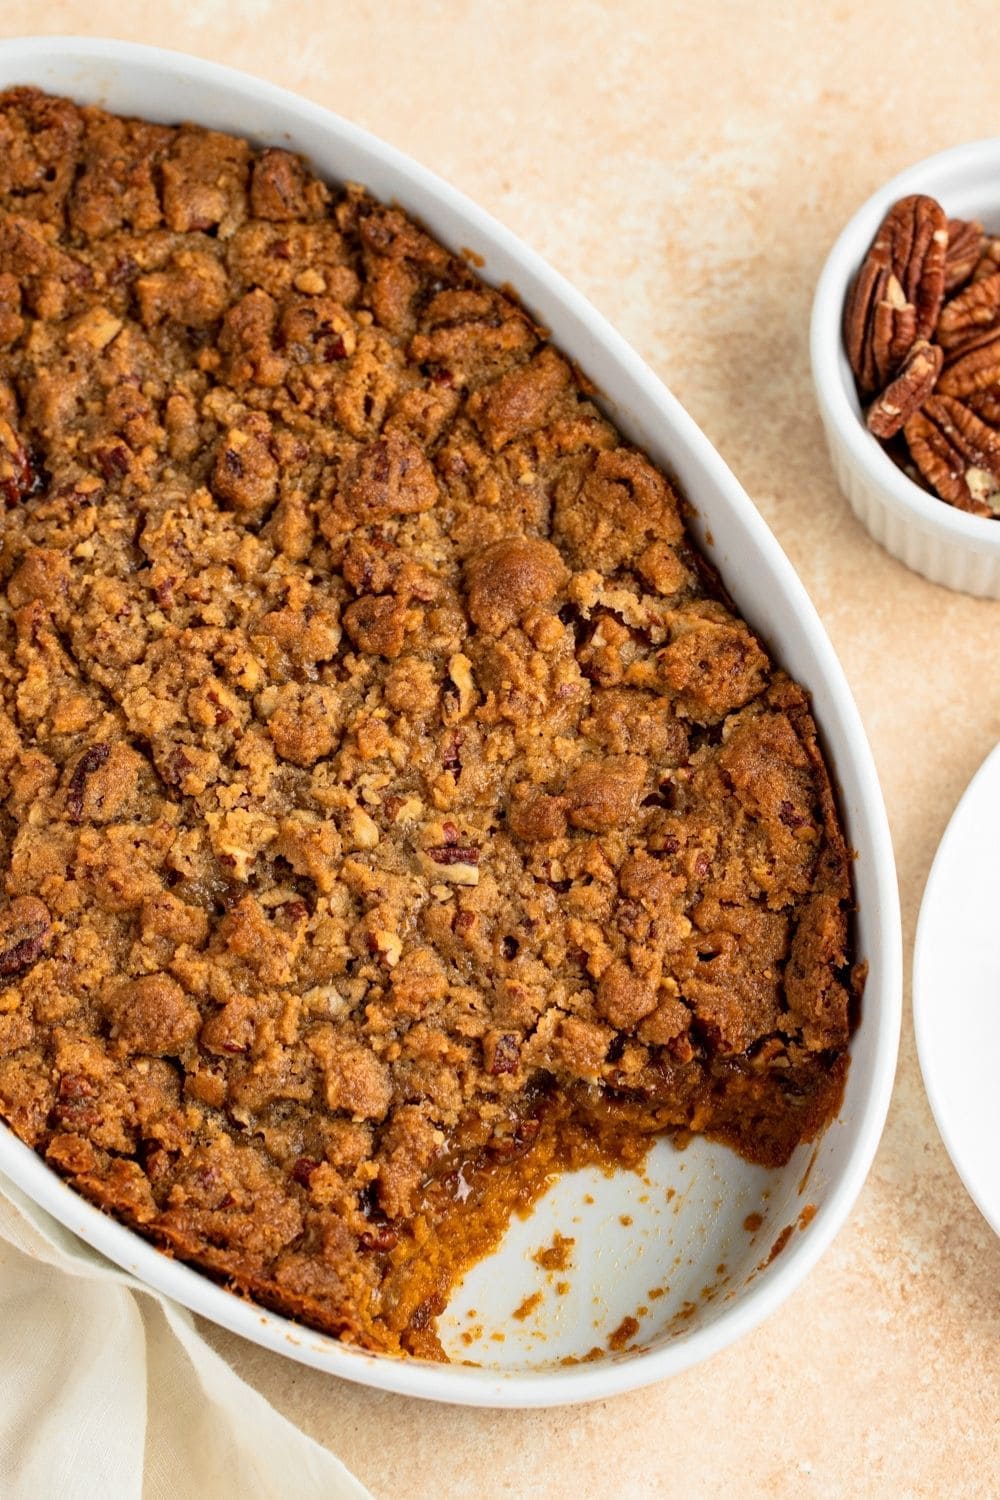 Sweet Potato Casserole and a bowl of walnuts on the side